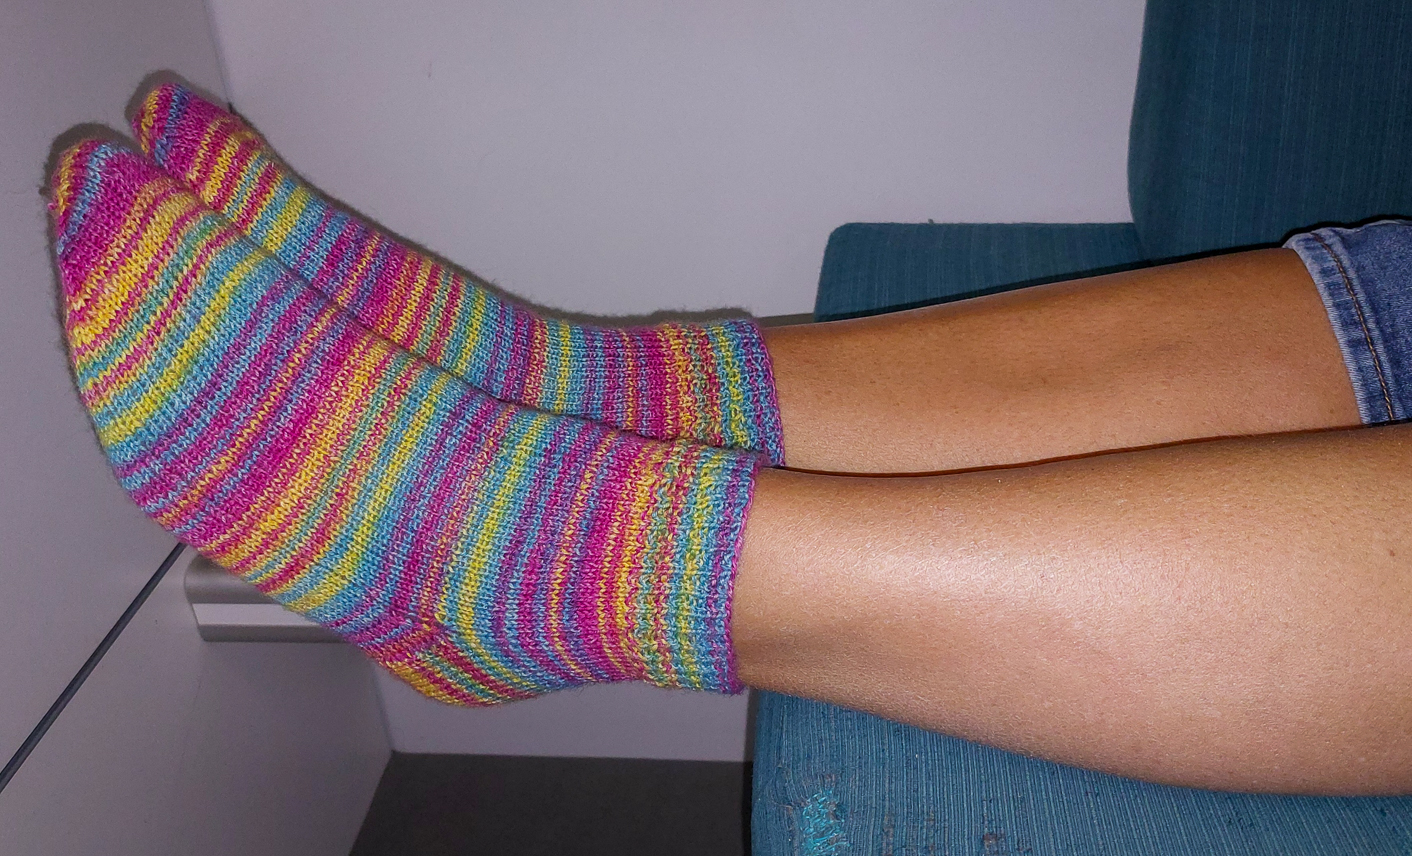 <span  class="uc_style_uc_tiles_grid_image_elementor_uc_items_attribute_title" style="color:#ffffff;">Heike got a new hobby: making us new warm socks, for cold desert nights</span>